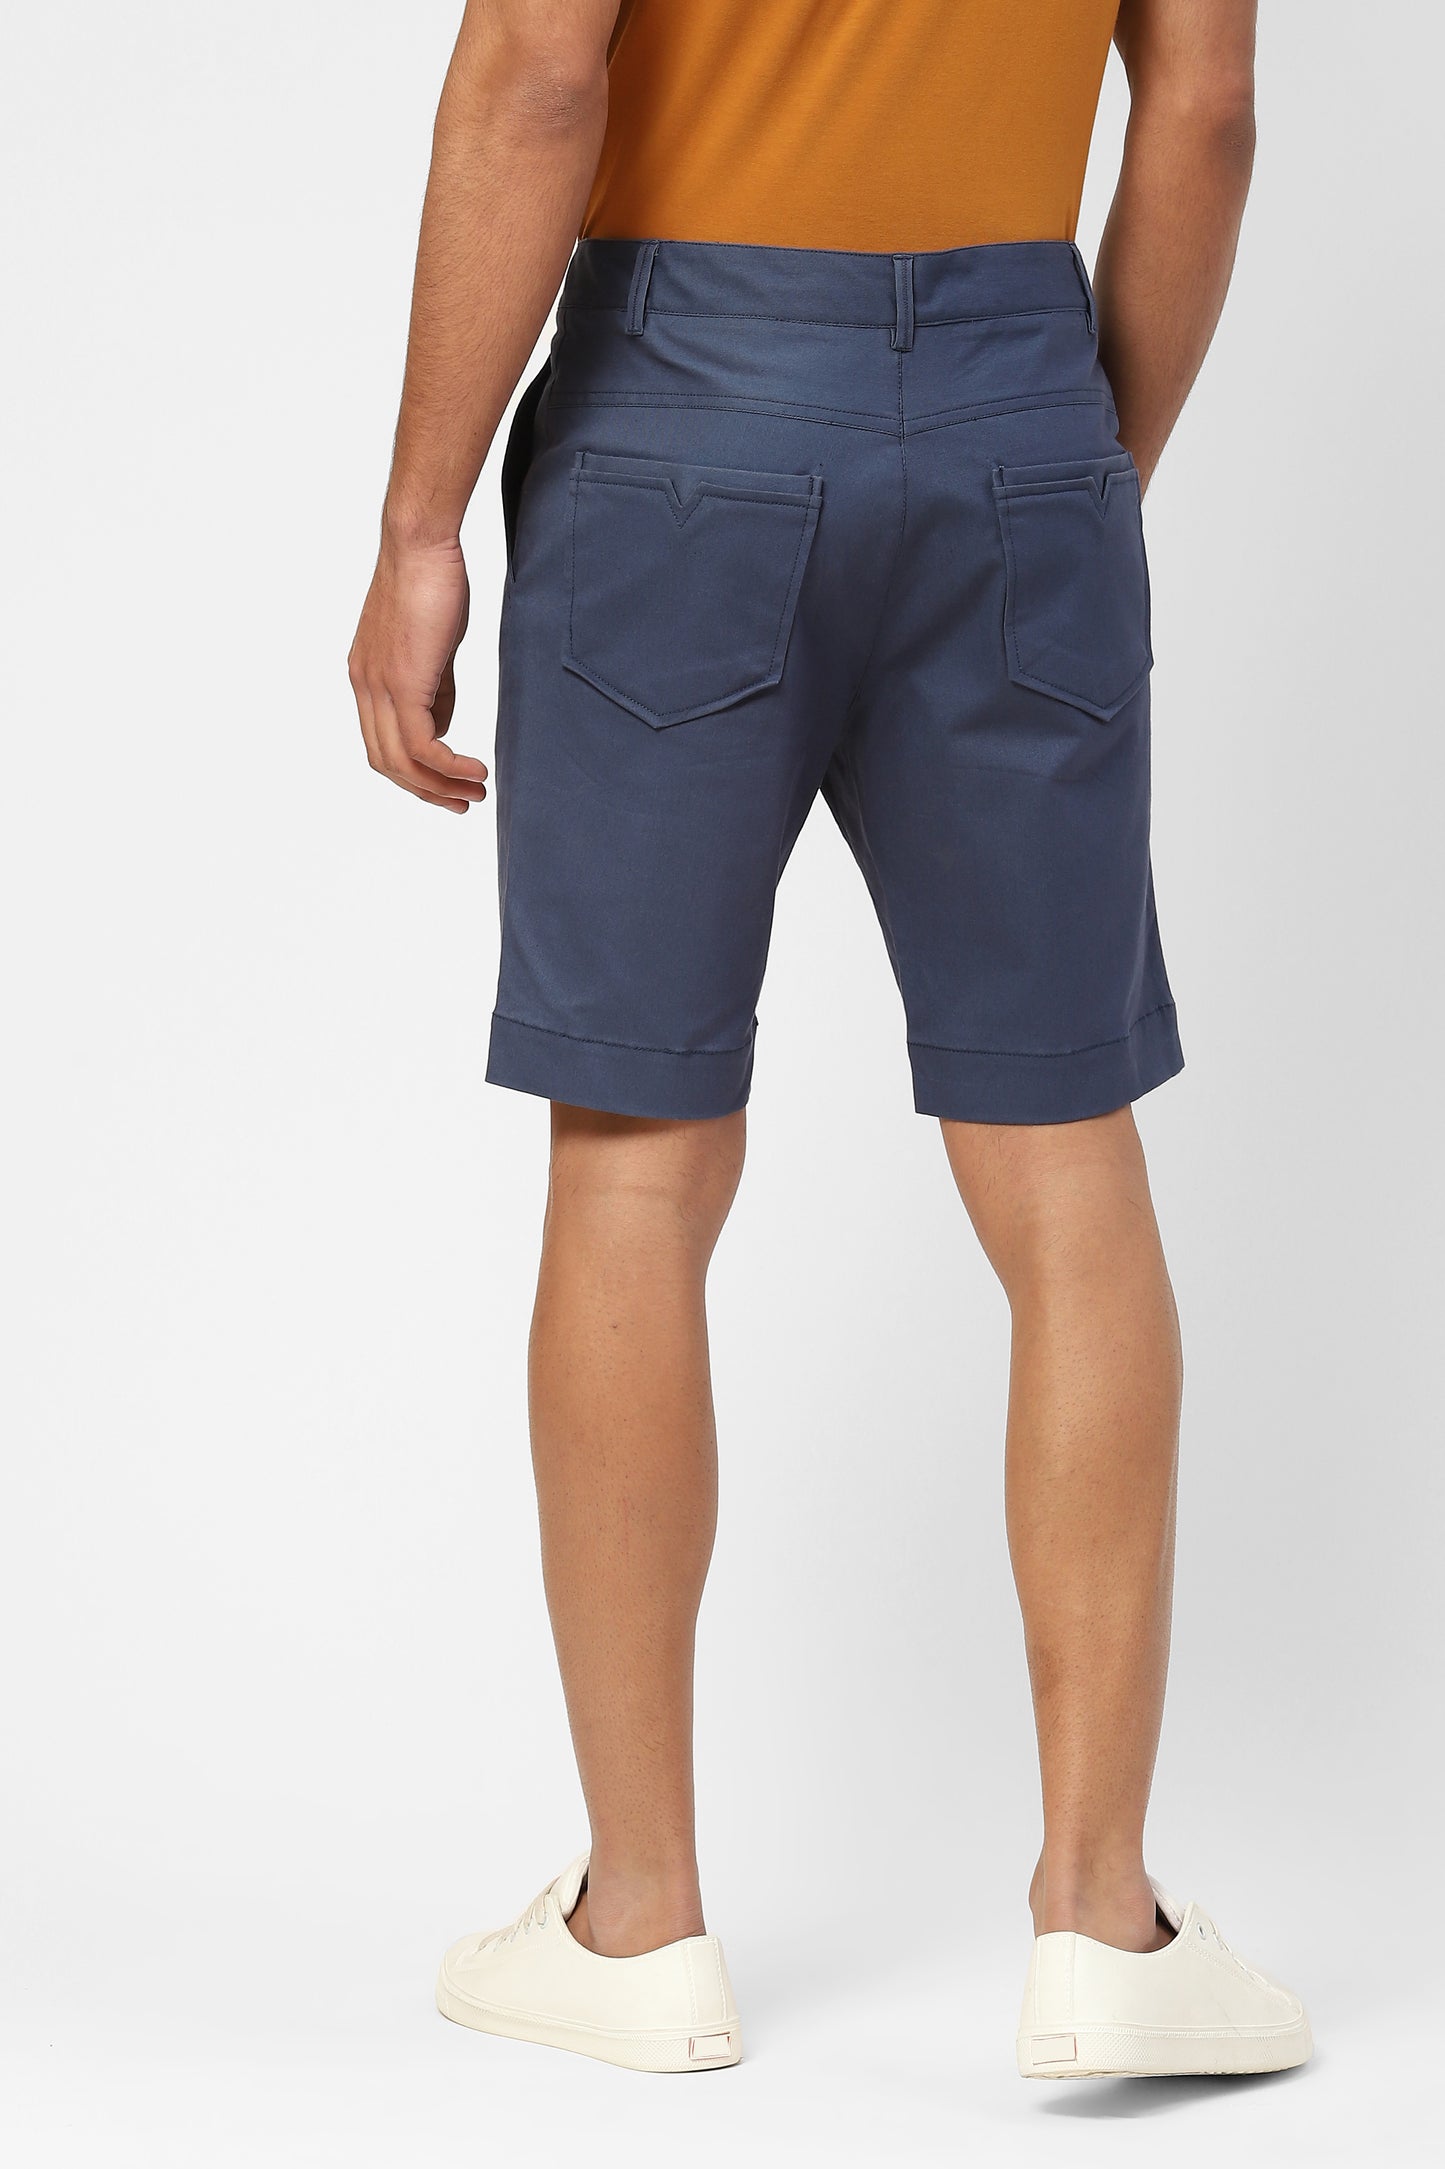 Mens Navy Blue Cotton Shorts With Back Pockets